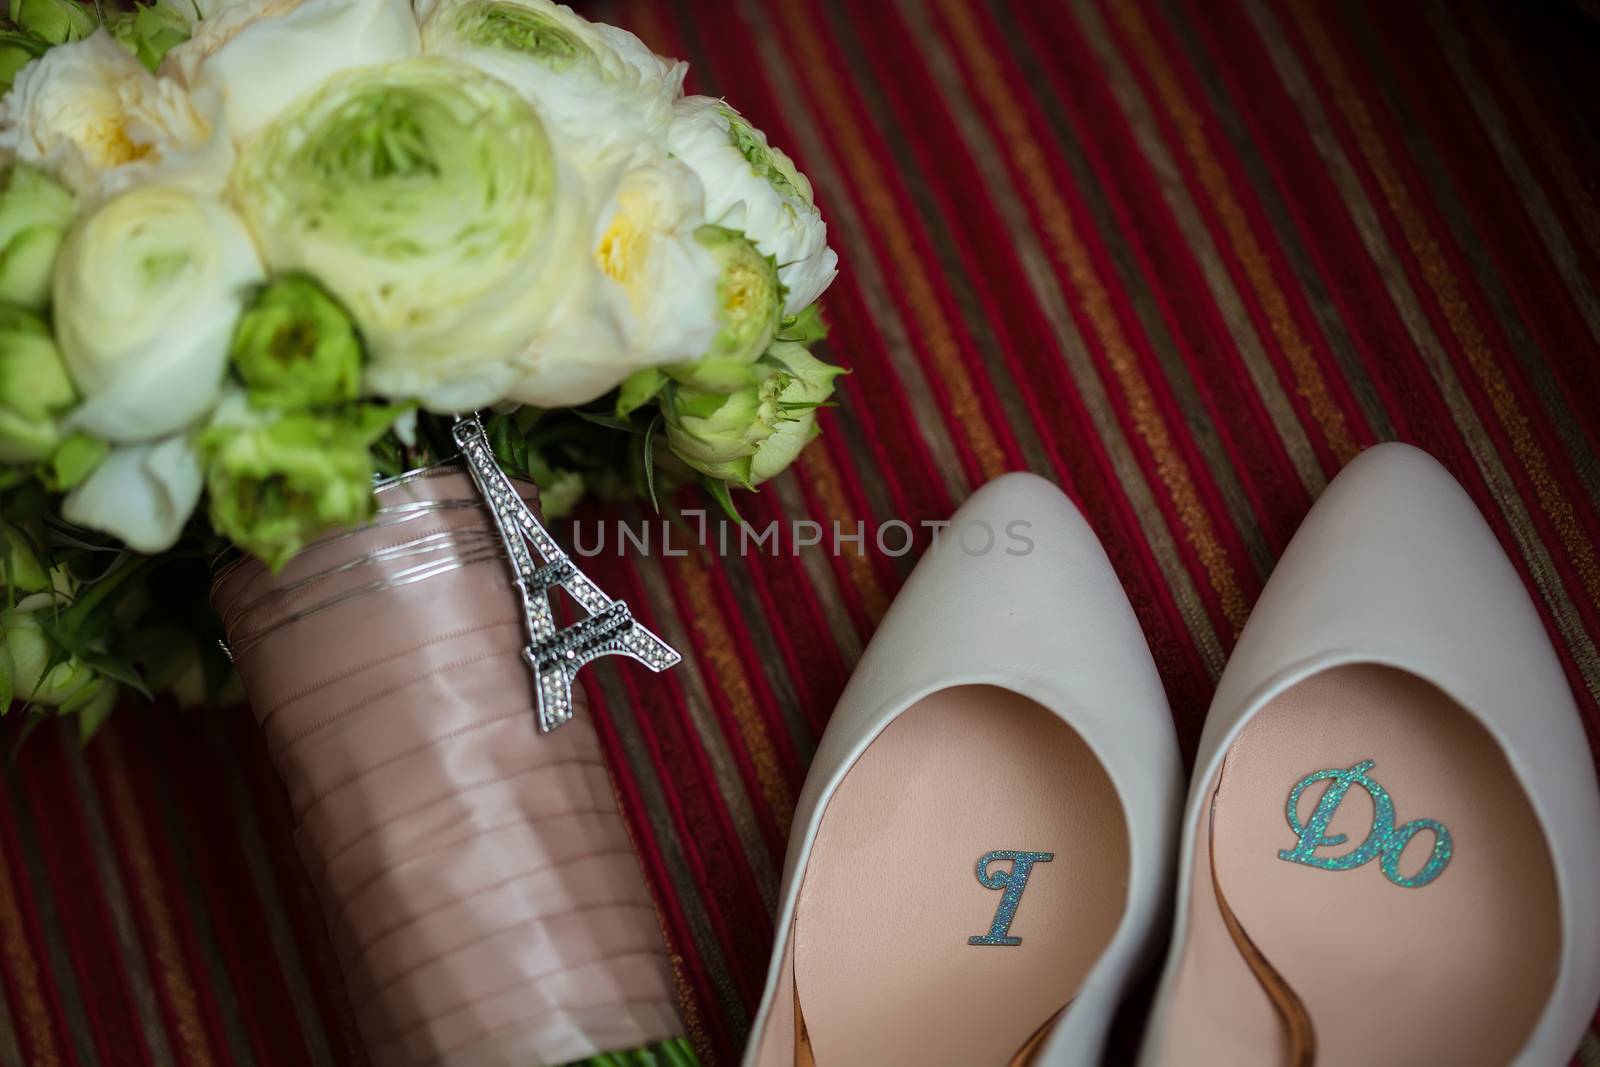 wedding shoes and wedding bouquet of white roses